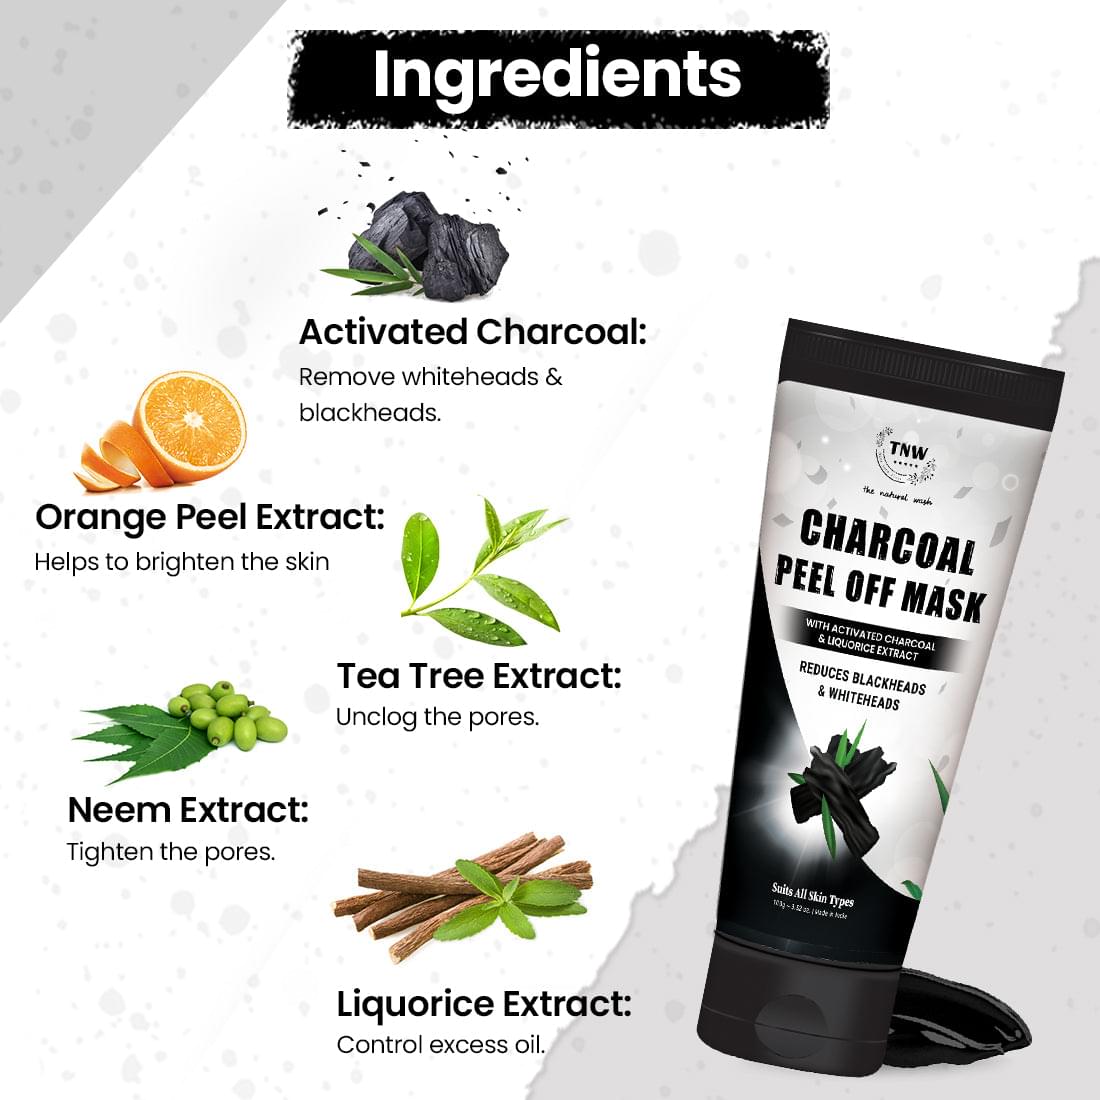 Charcoal Peel Off Mask for Blackheads and Removes Tan.